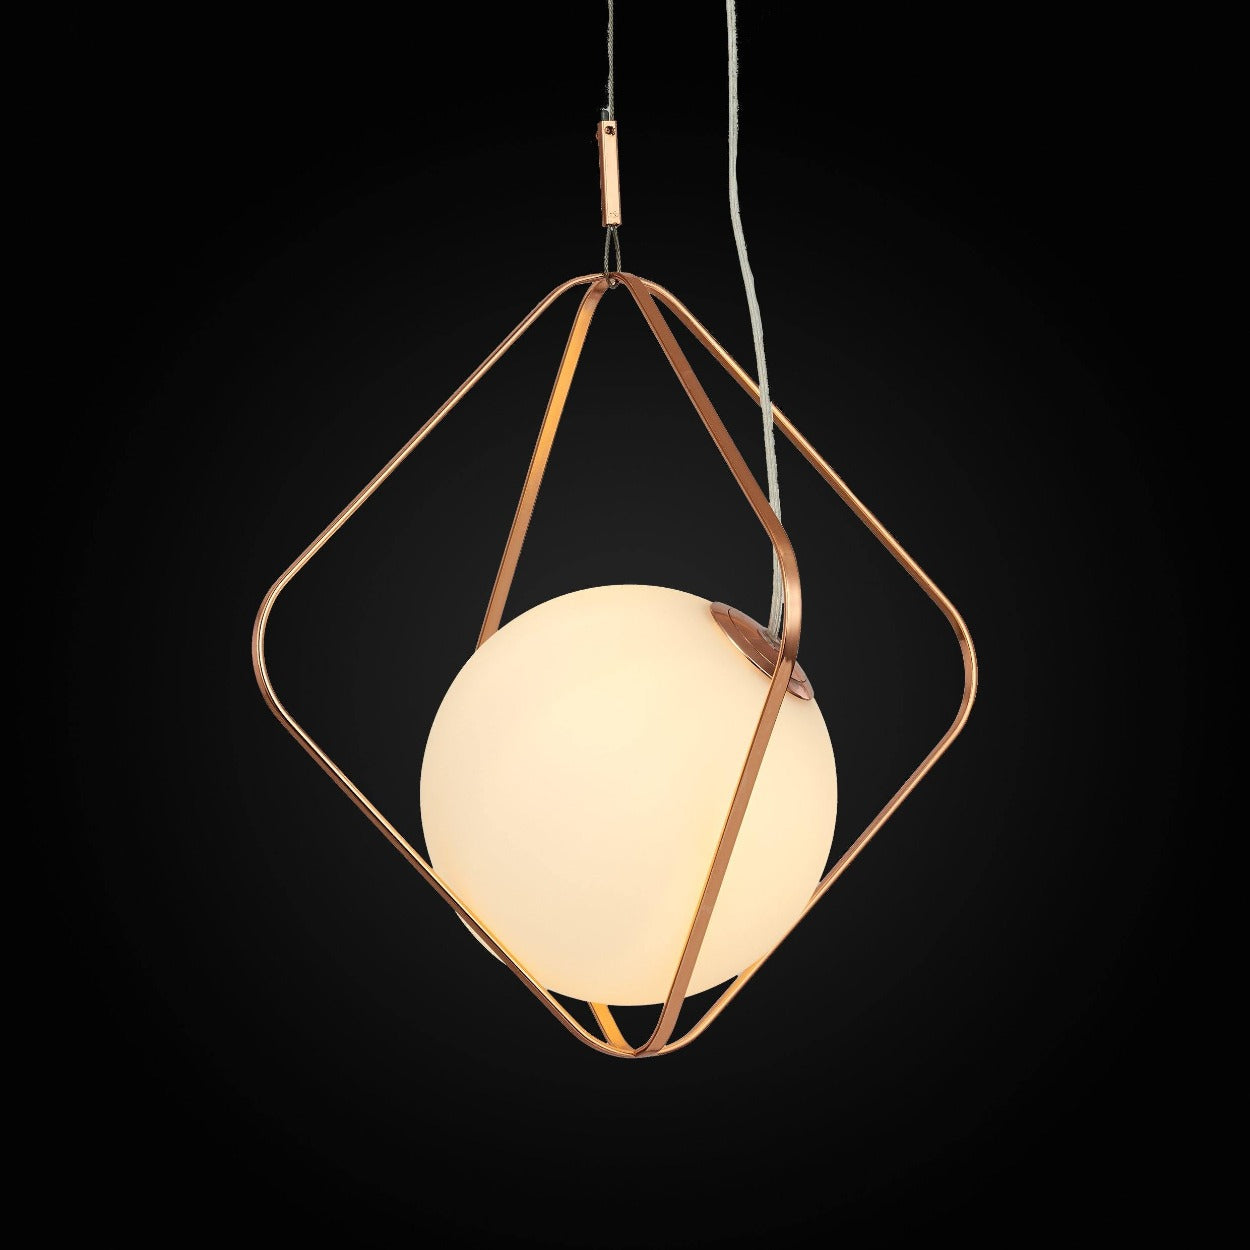 ANKUR SAMARA ROSE GOLD METAL CAGE WITH FROSTED GLASS PENDANT LIGHT - Ankur Lighting